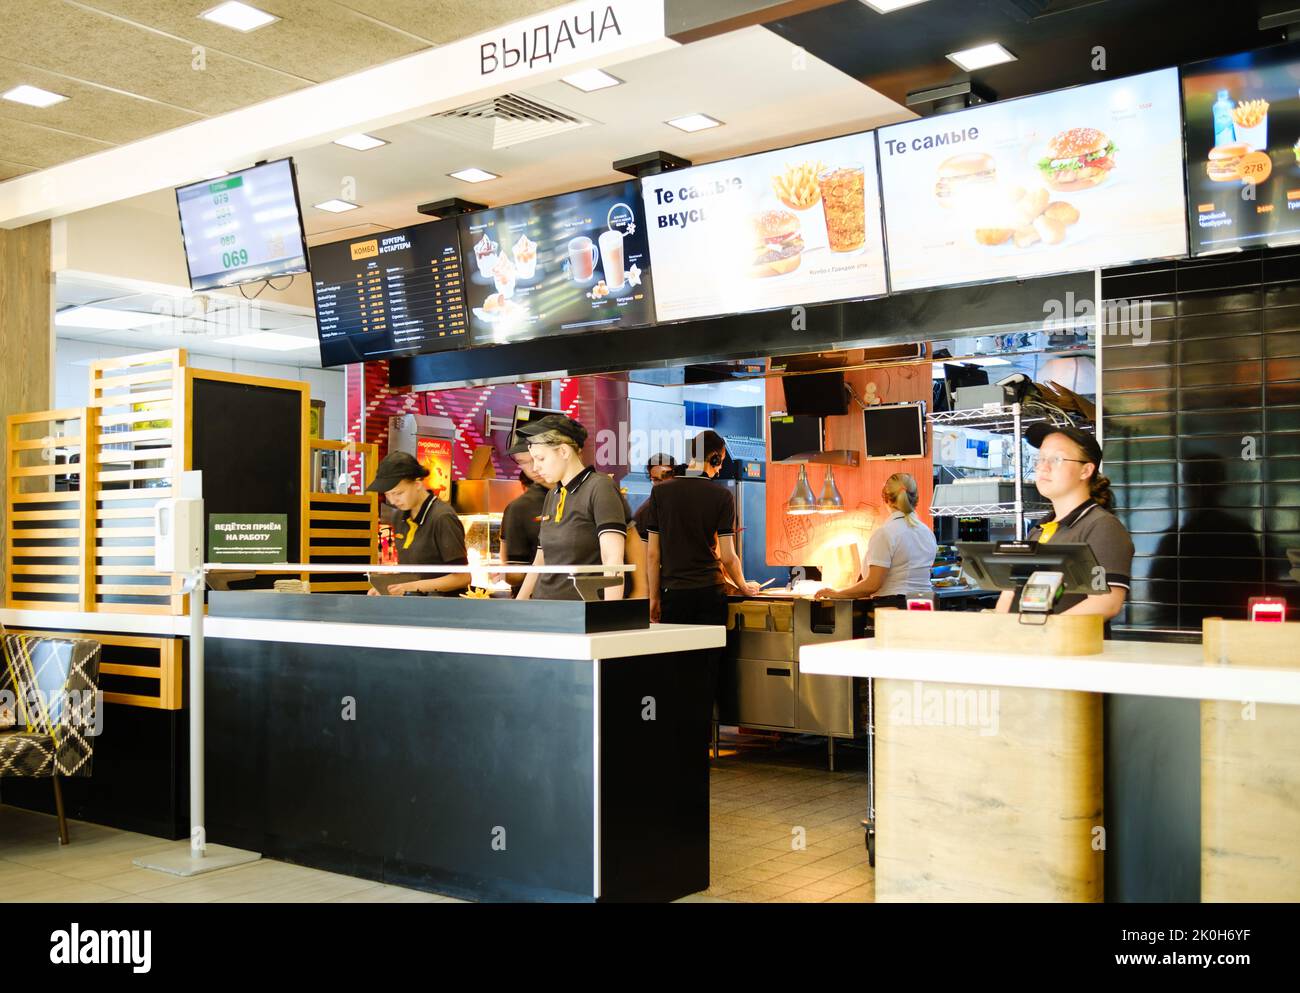 SAINT-PETERSBURG, RUSSIA - JUNE 29, 2022: interior of a fast food restaurant Vkusno I Tochka, which are reopened clones of McDonald's who left Russia Stock Photo